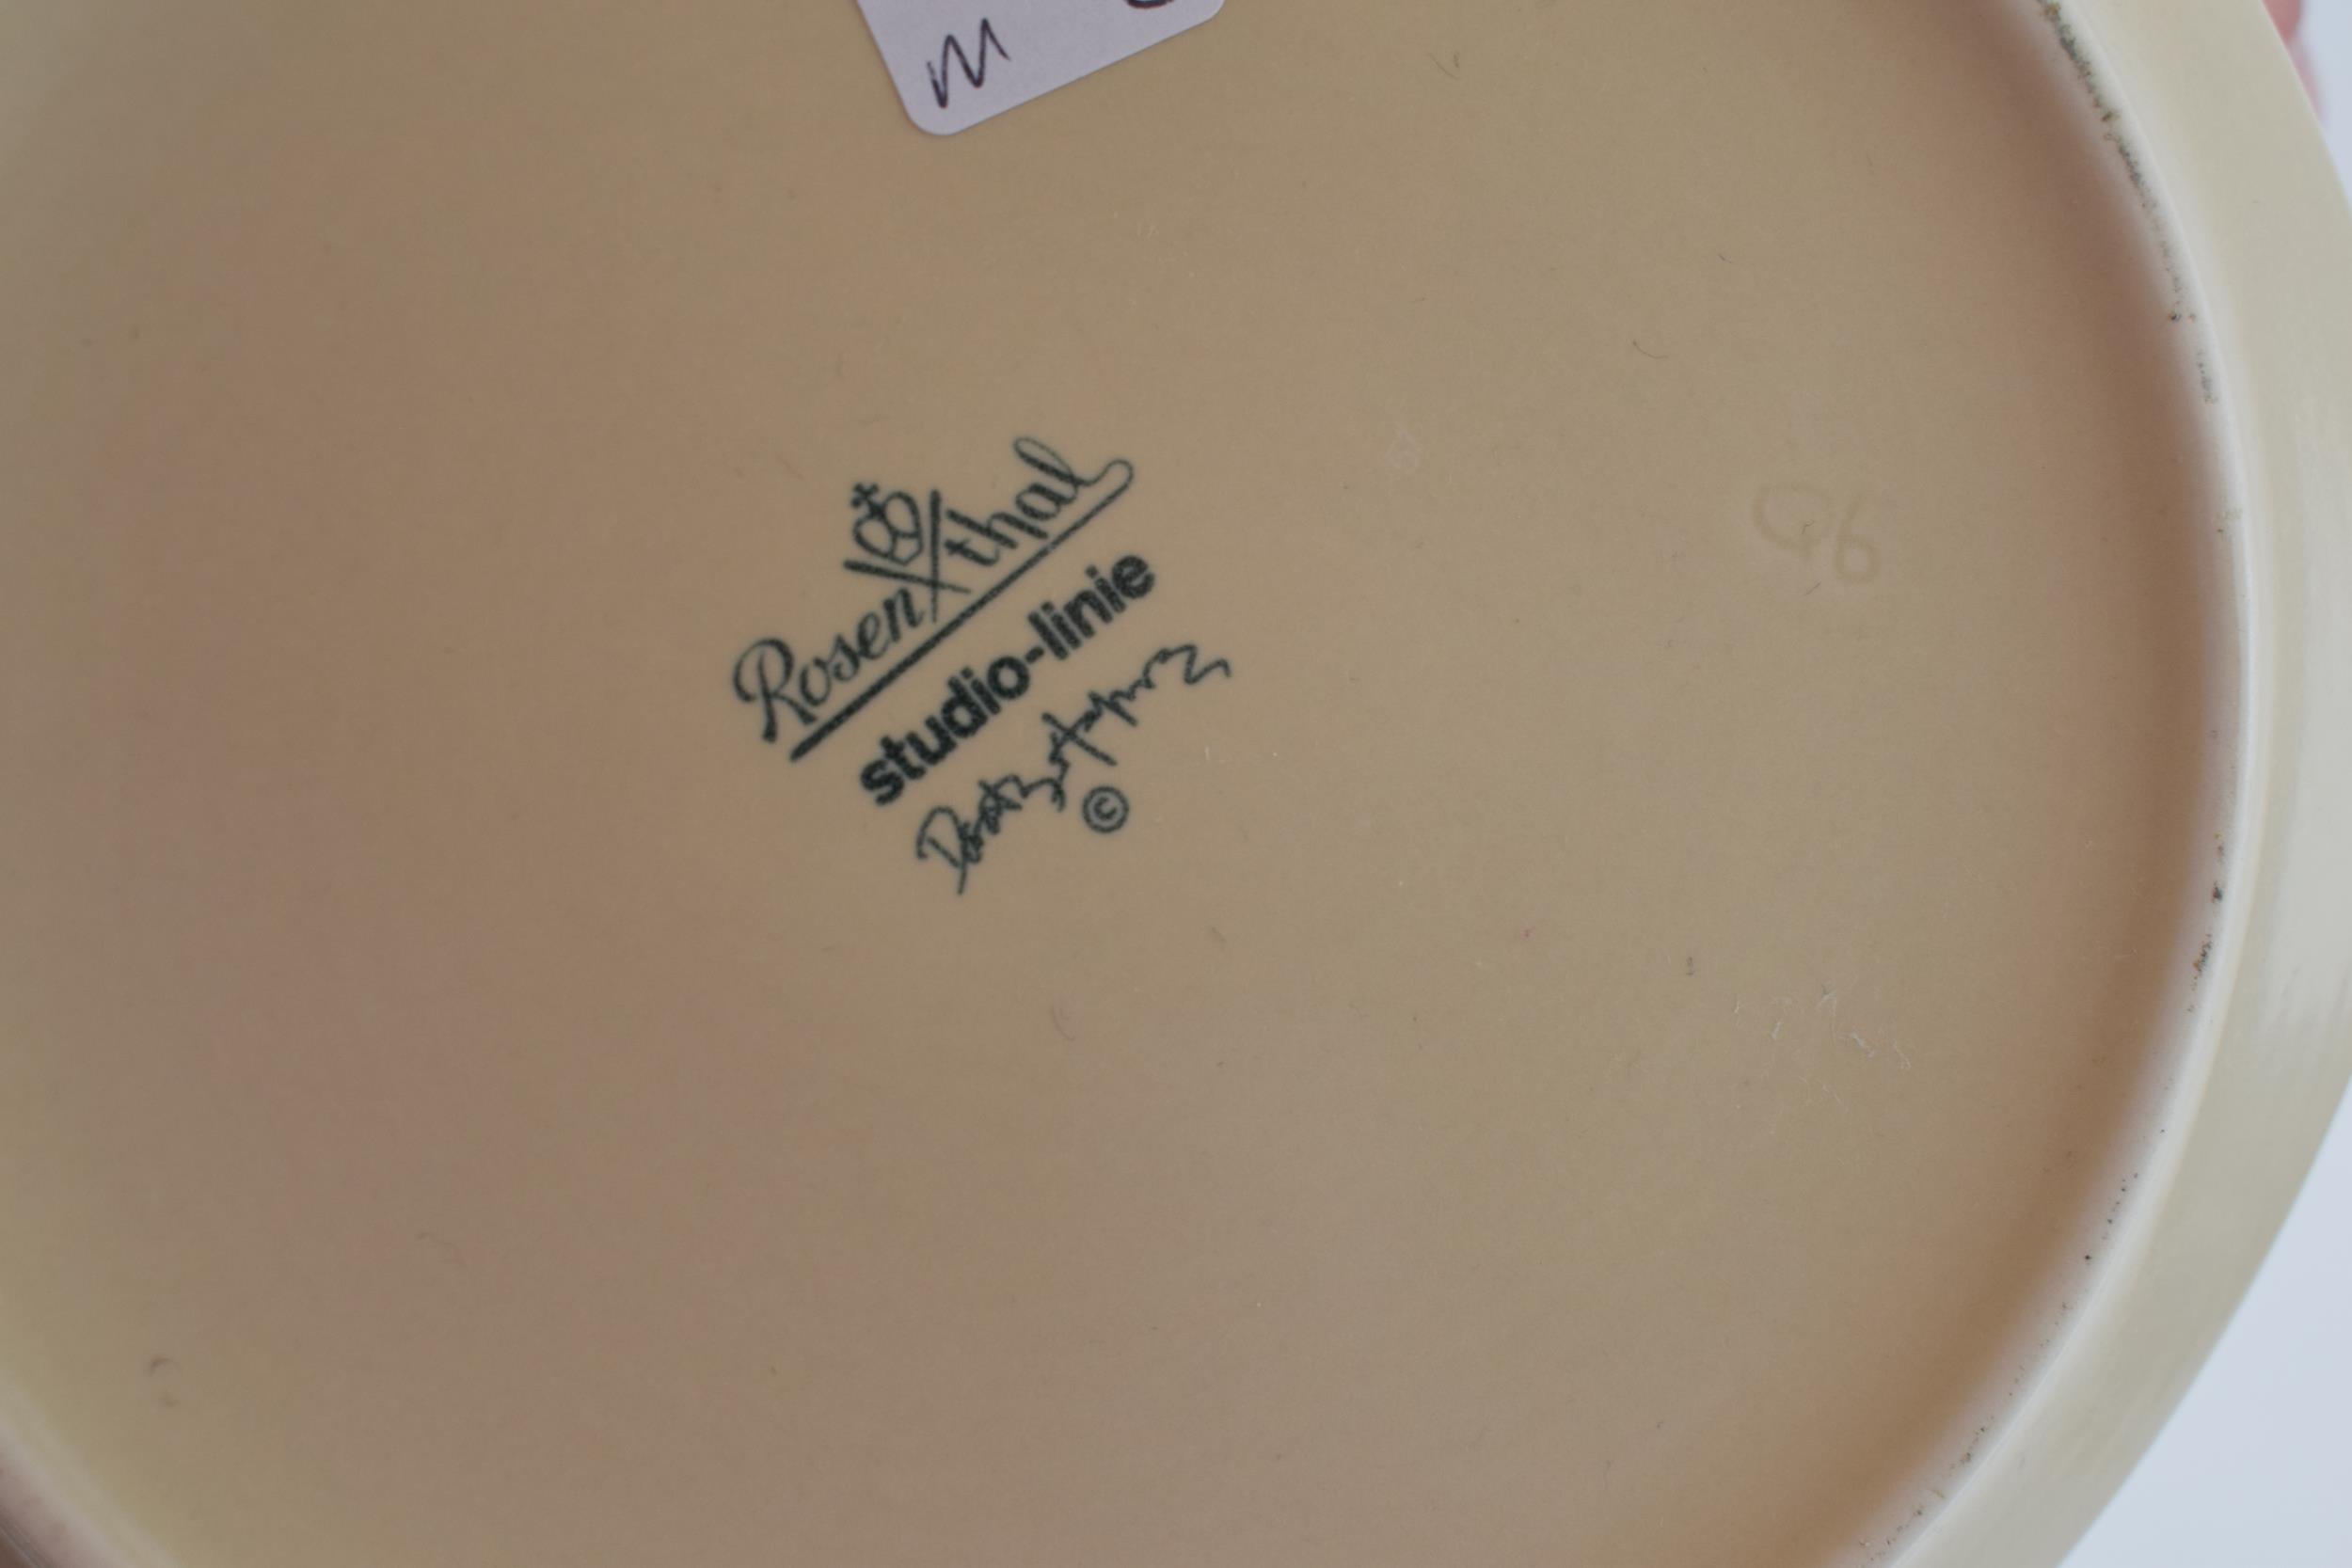 Rosenthal studio-linie 'Flash' bowl, 20.5cm wide. In good condition with no obvious damage or - Bild 3 aus 3